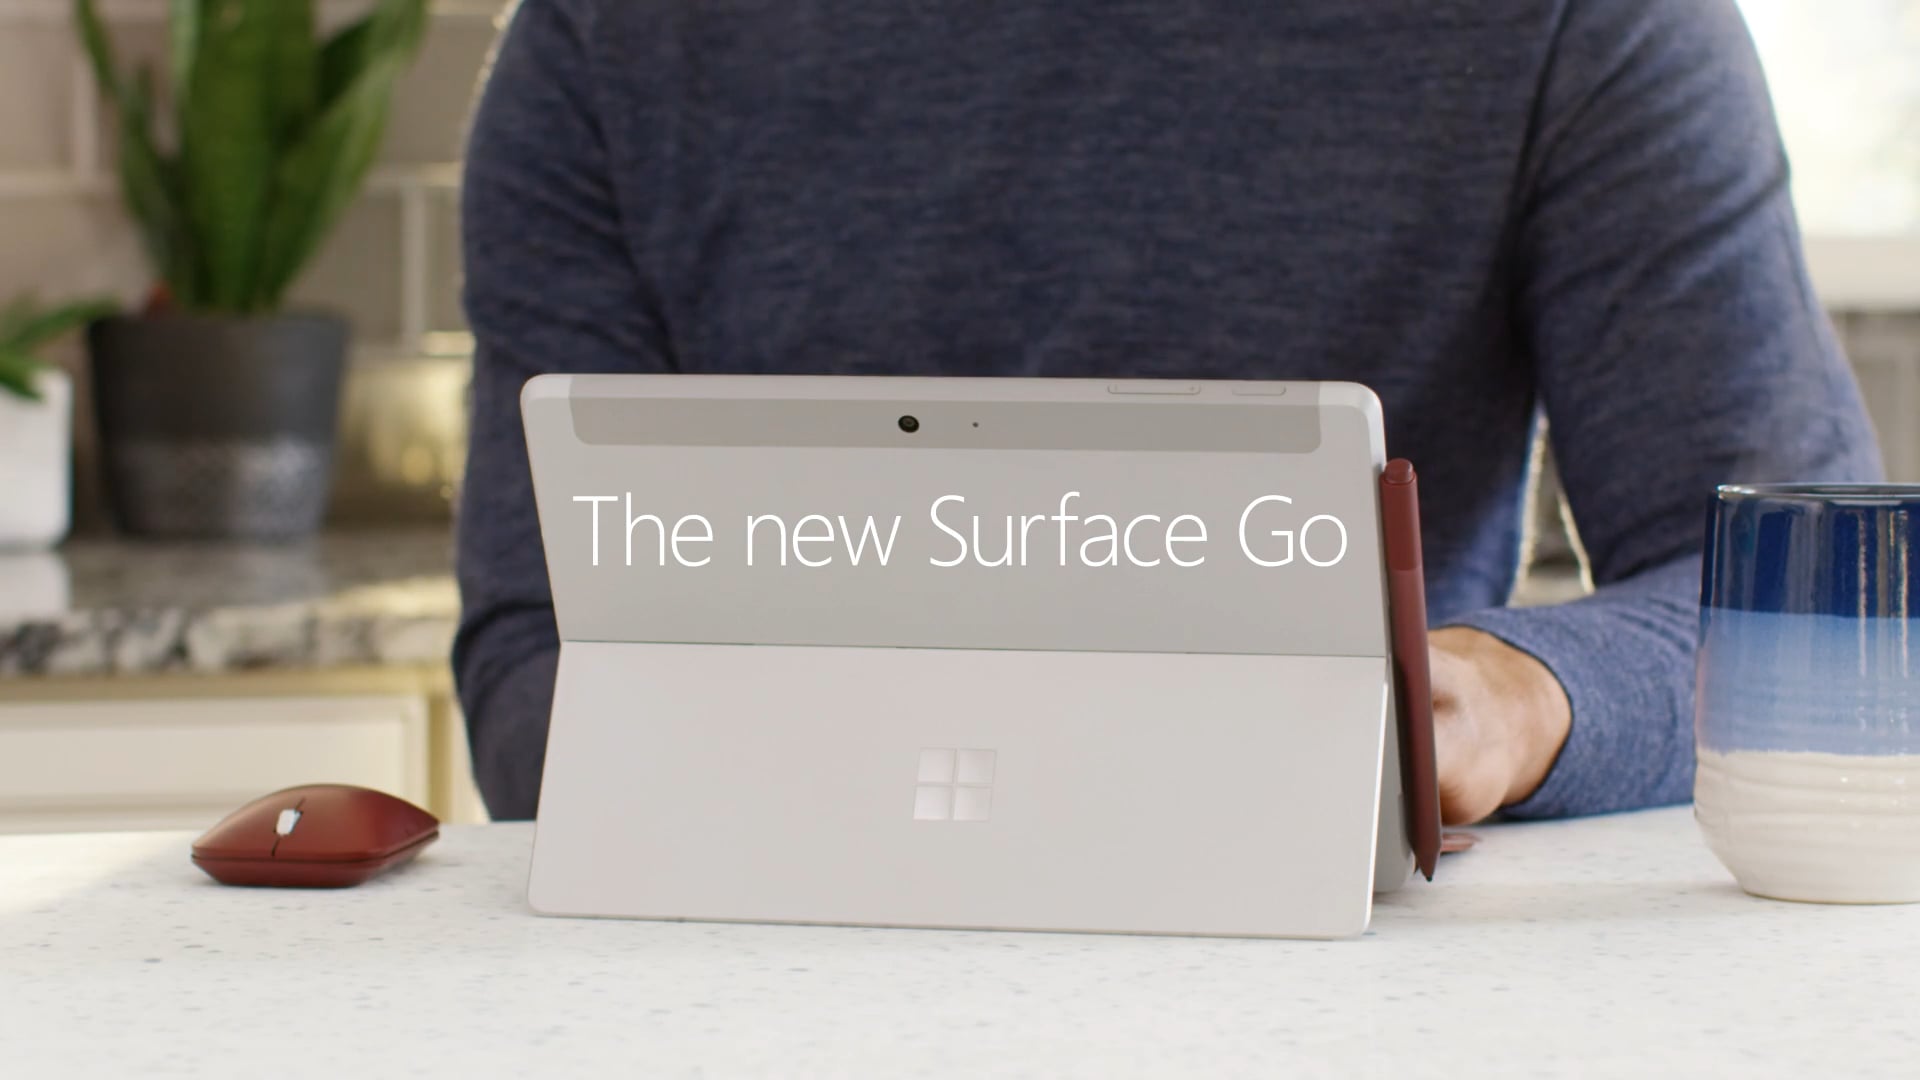 The new Surface Go: All day power on the go